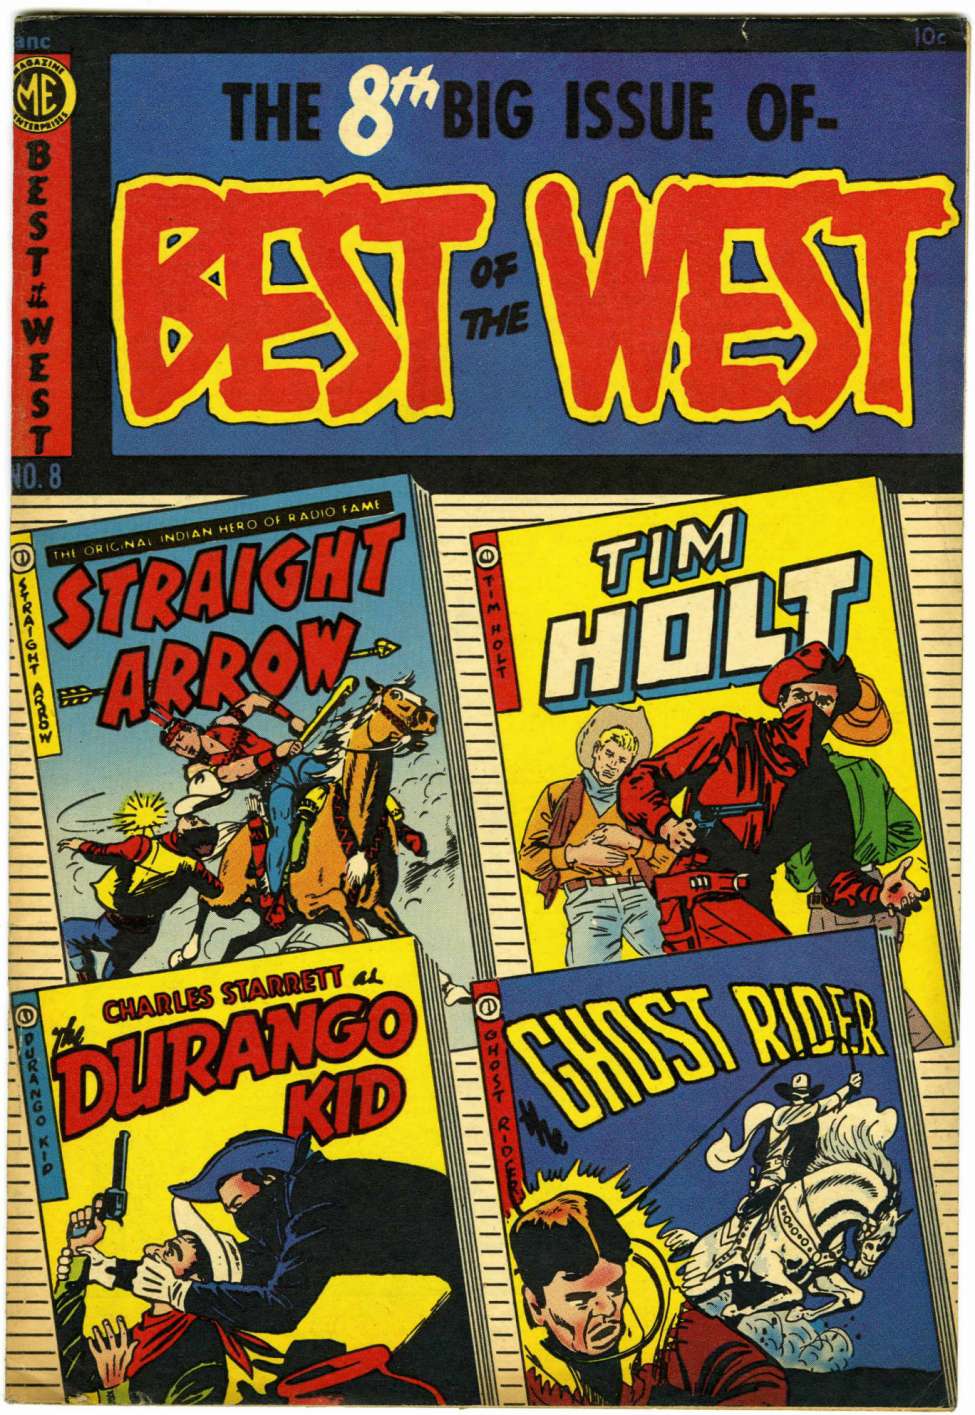 Comic Book Cover For Best of the West 8